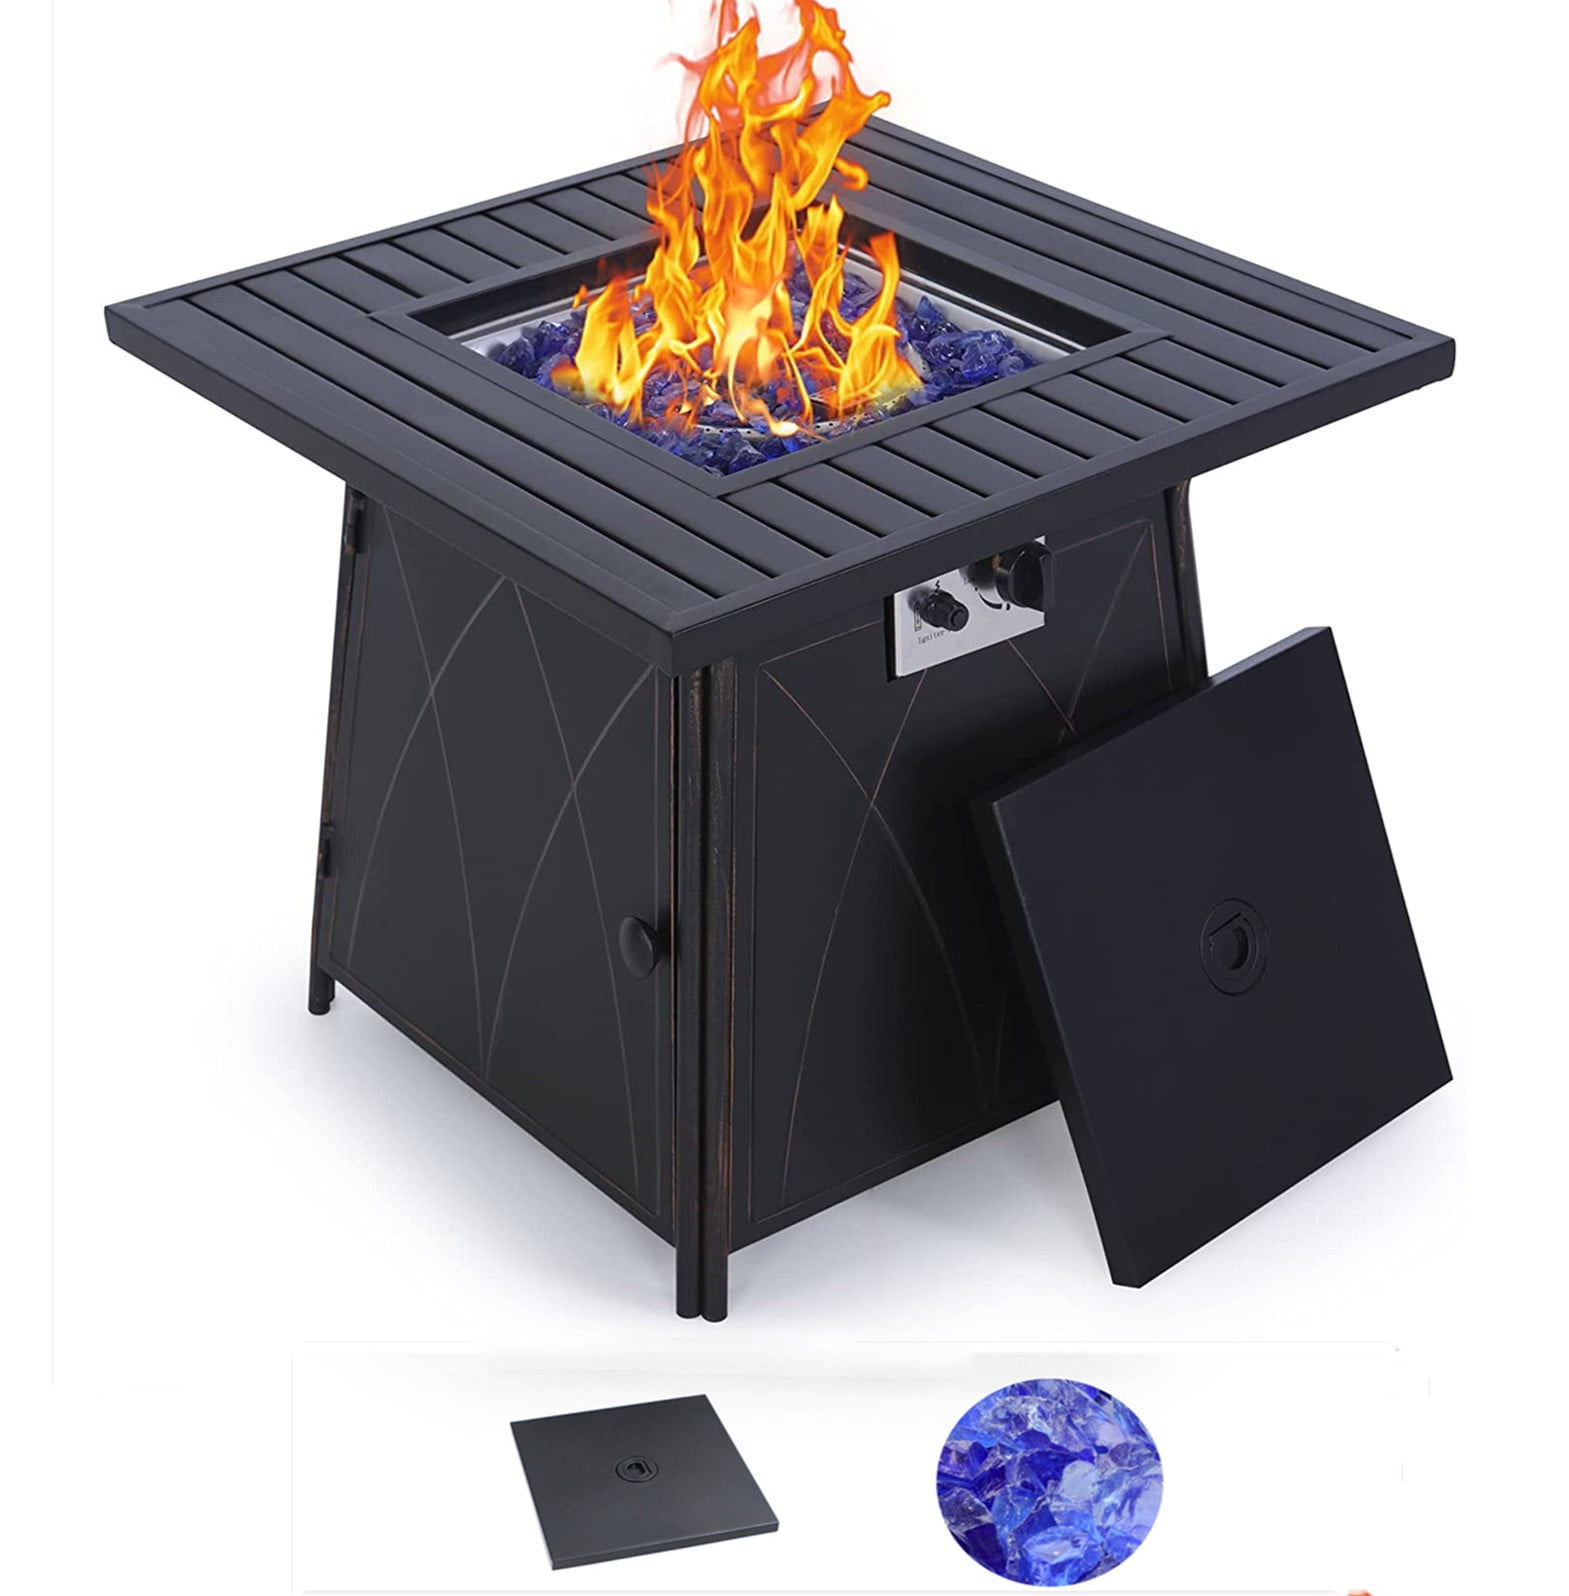 Mf Studio Gas Fire Pit Table 28 Inch, Black Gas Fire Pit